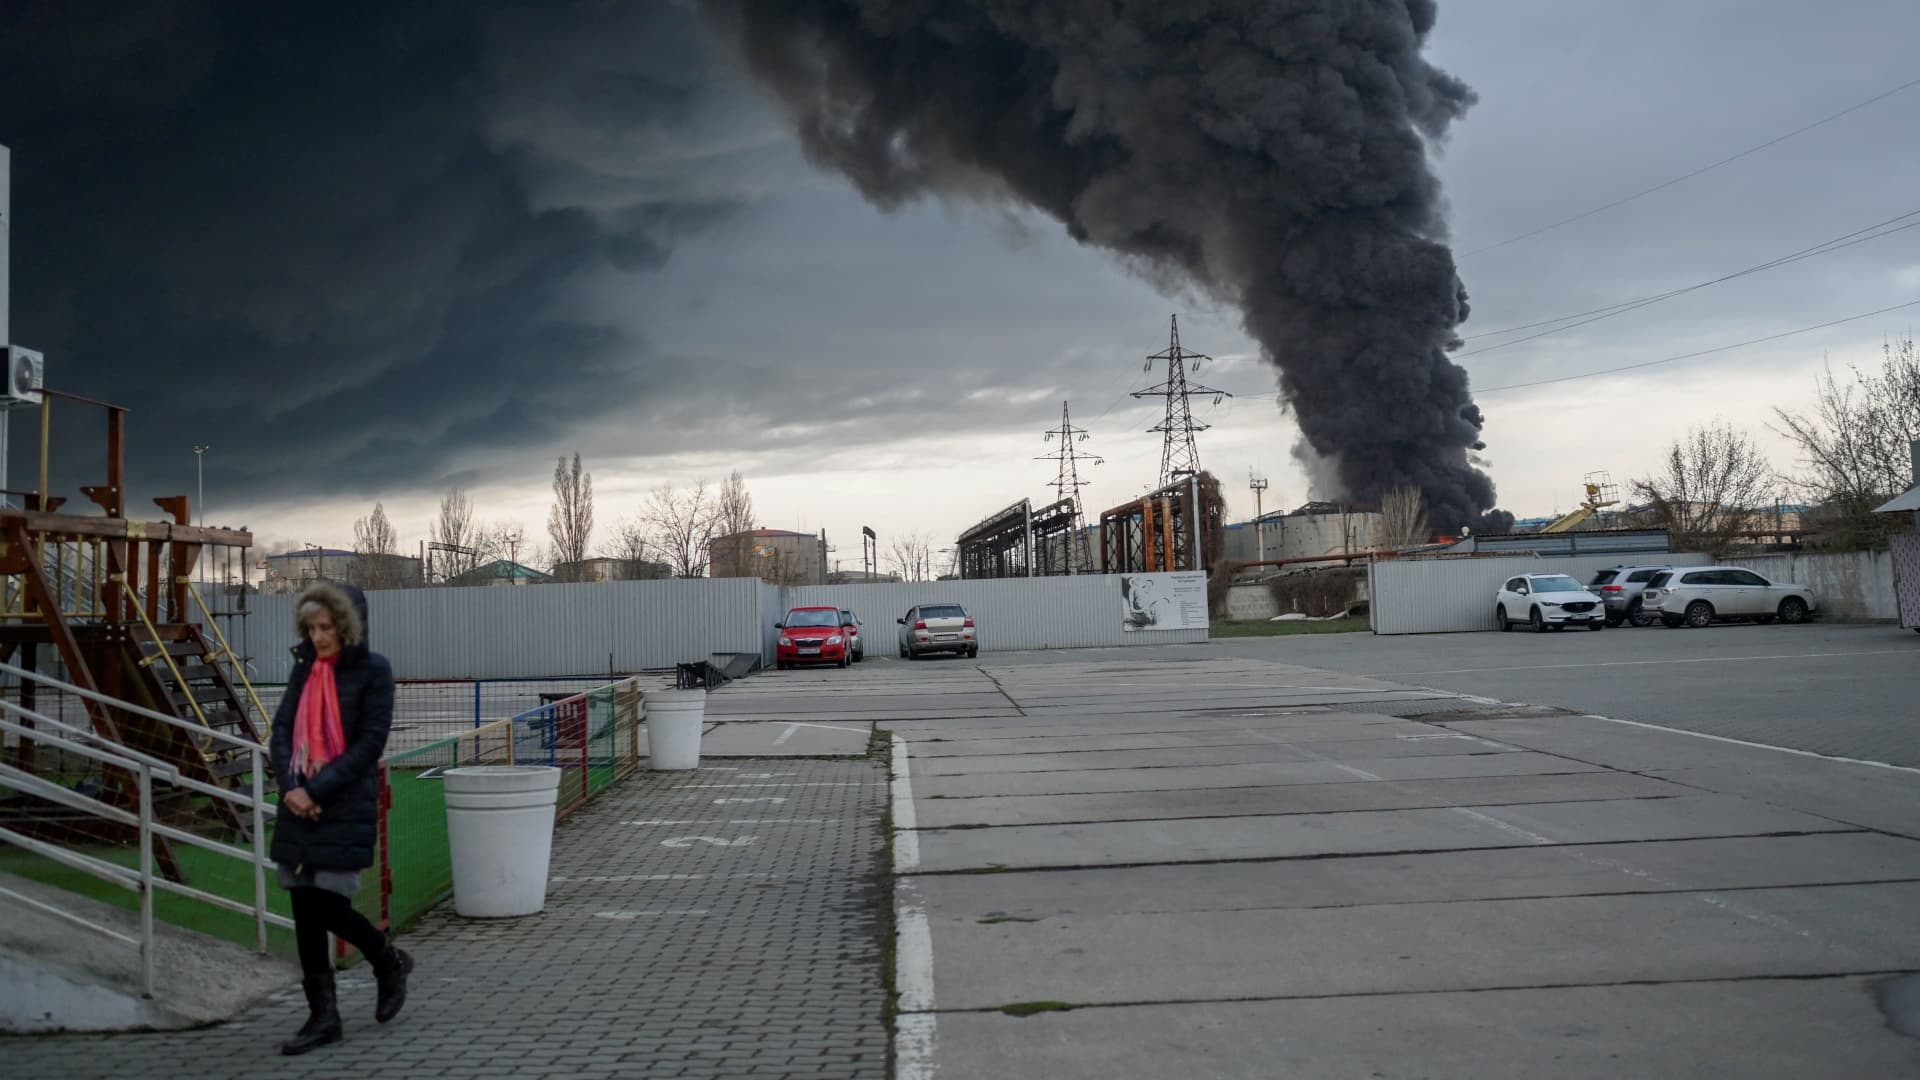 A woman seen walking in Ukraine's southern port city of Odesa as smoke fills the sky following a series of loud explosions.